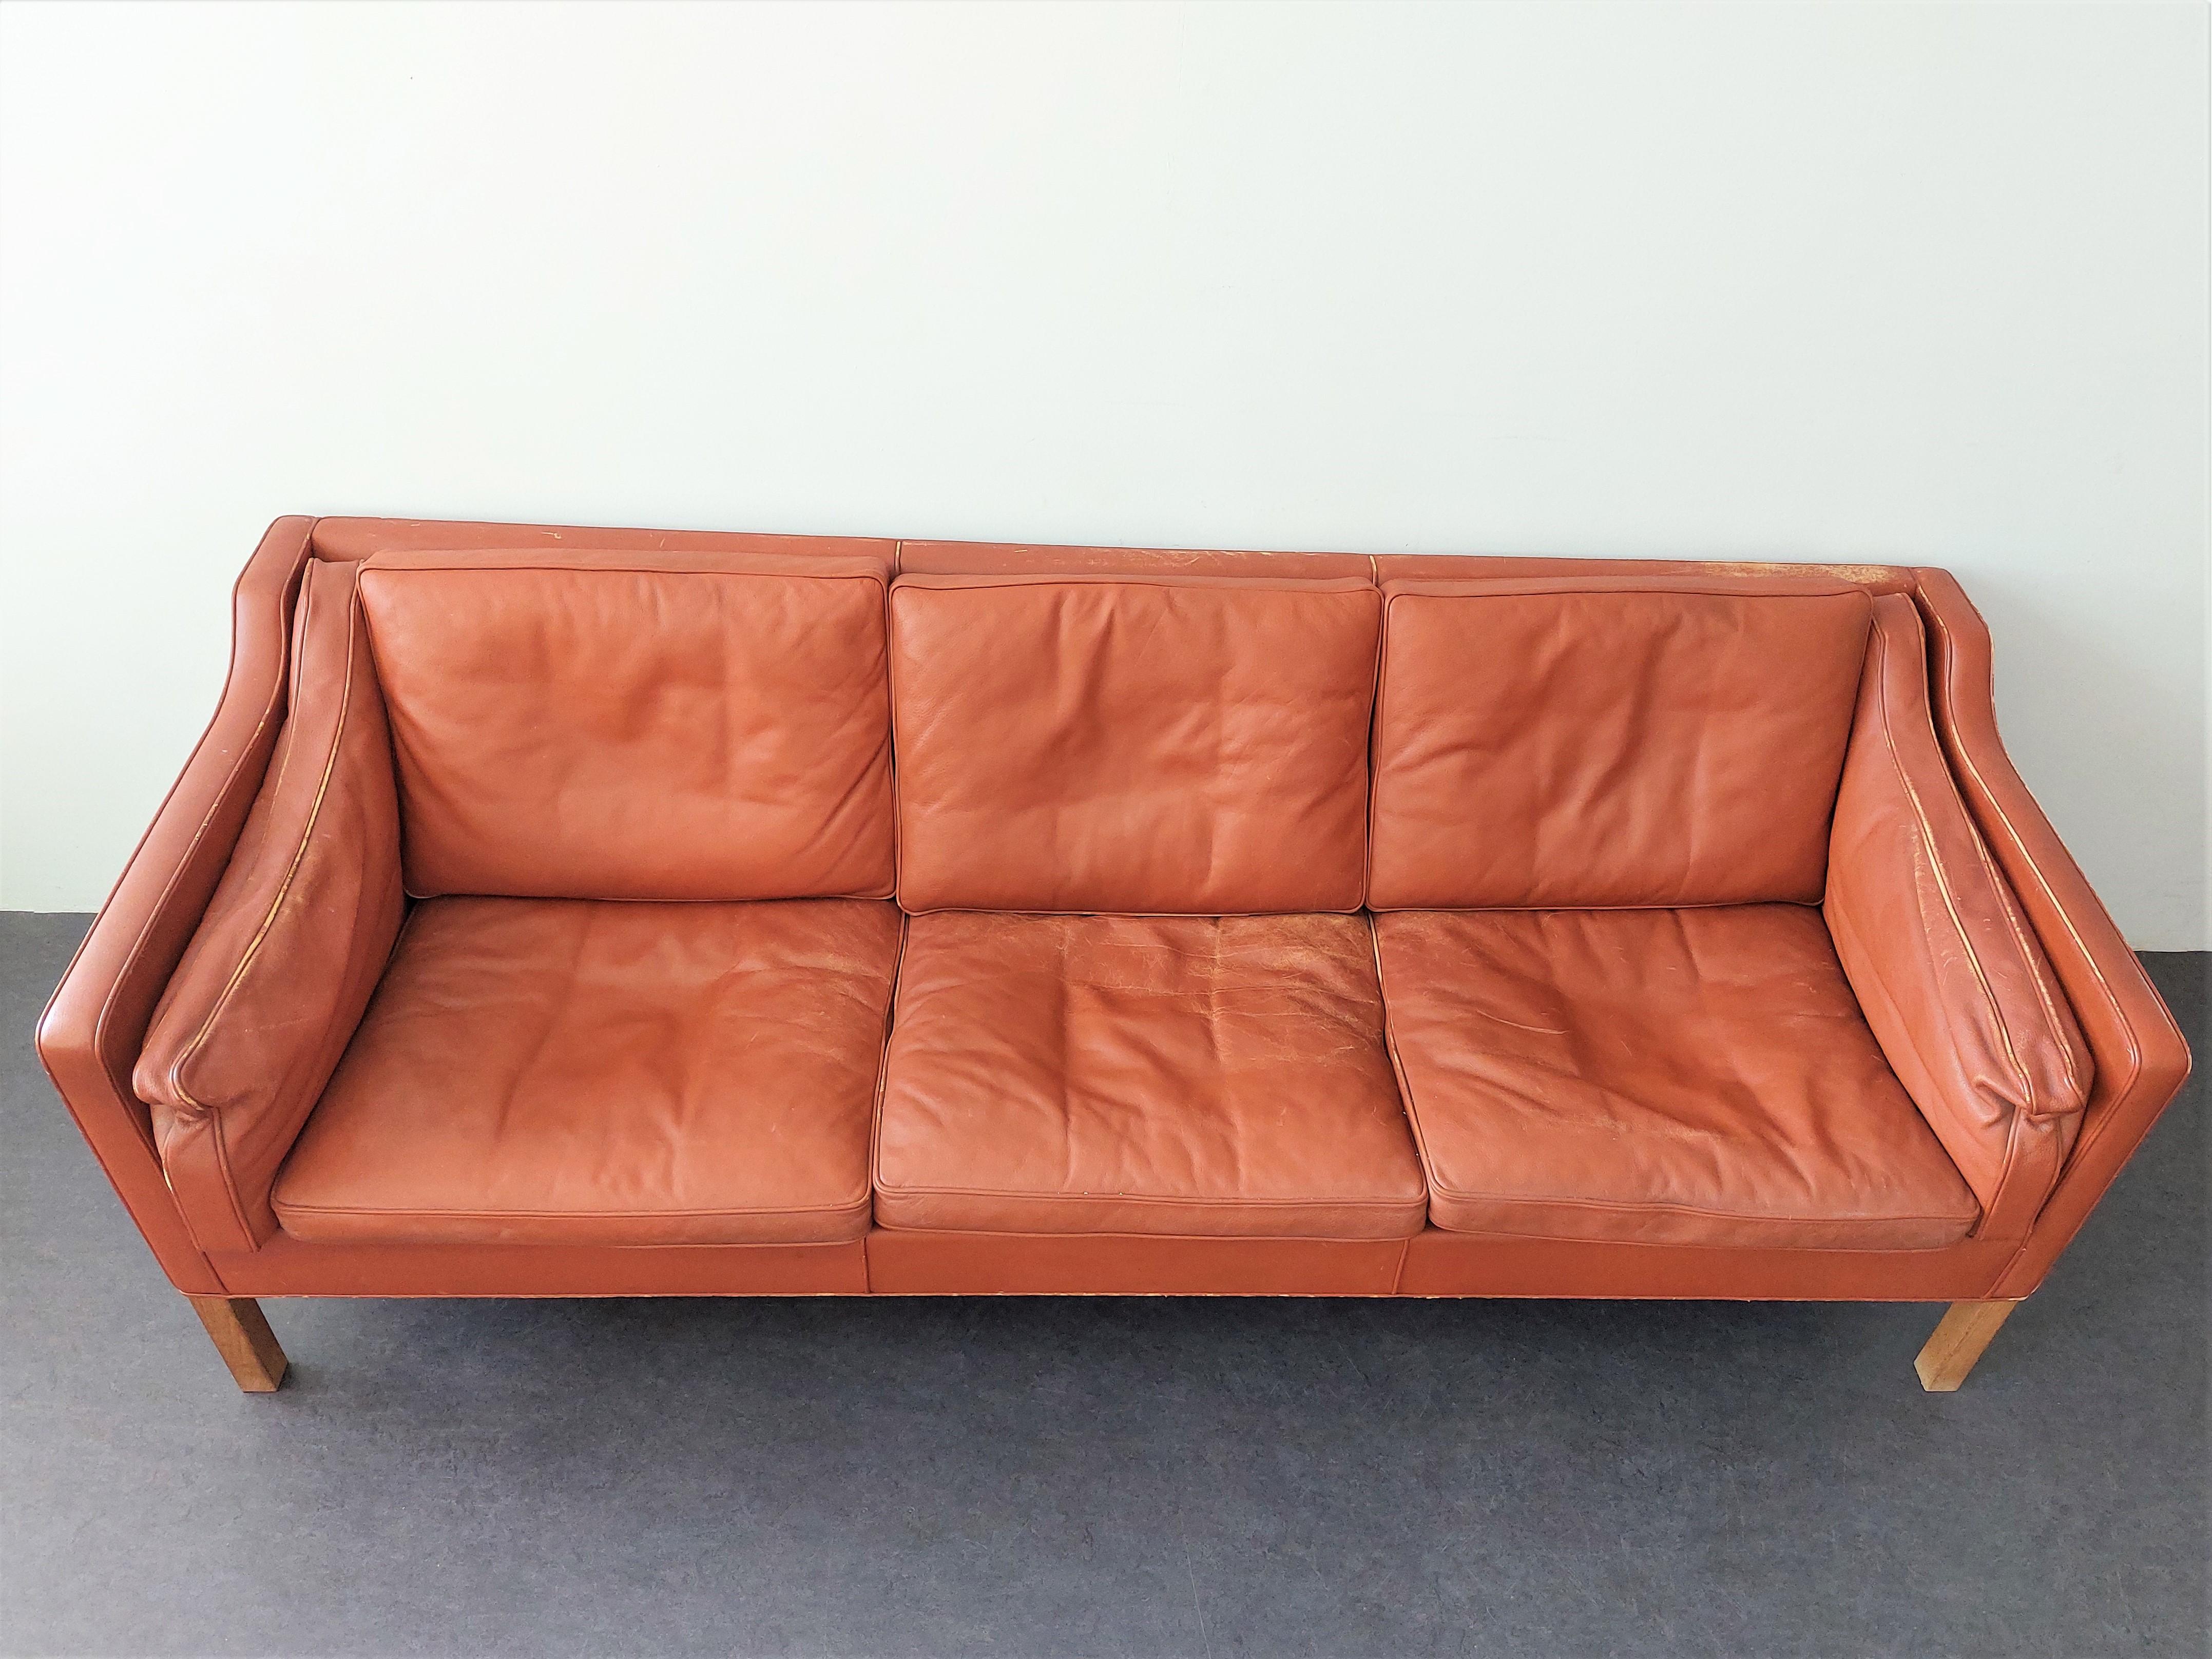 Danish 2213 3-seater leather sofa by Børge Mogensen for Fredericia, Denmark 1962 For Sale